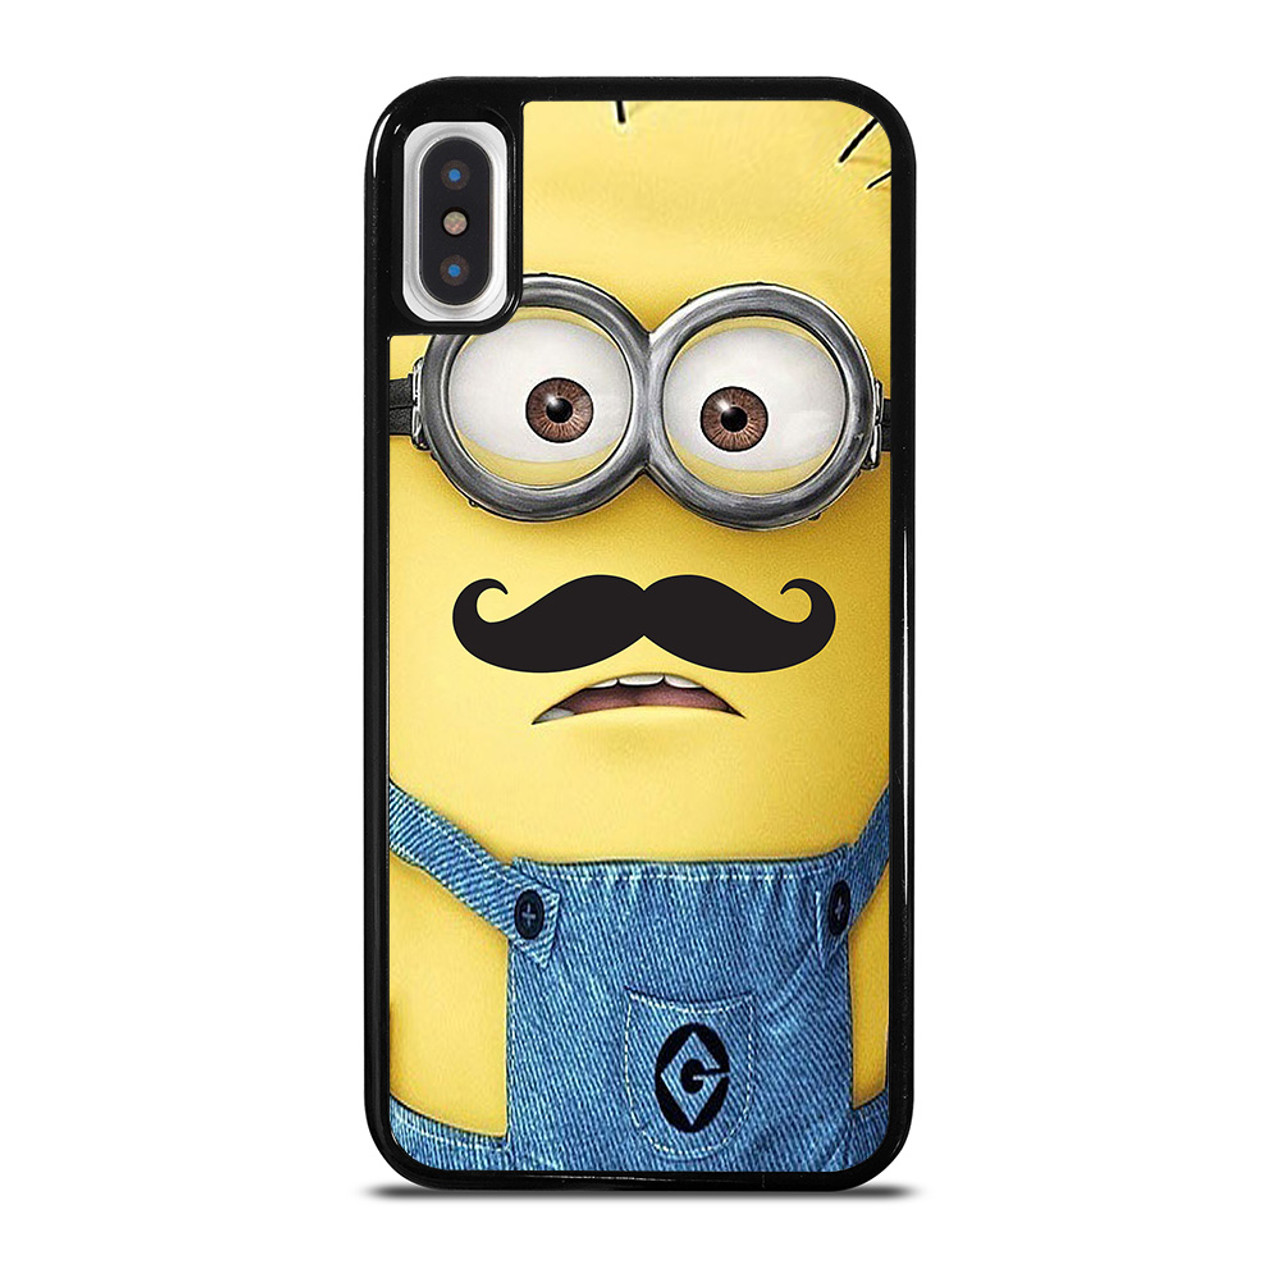 WITH MOUSTACHE iPhone X / XS Case Cover